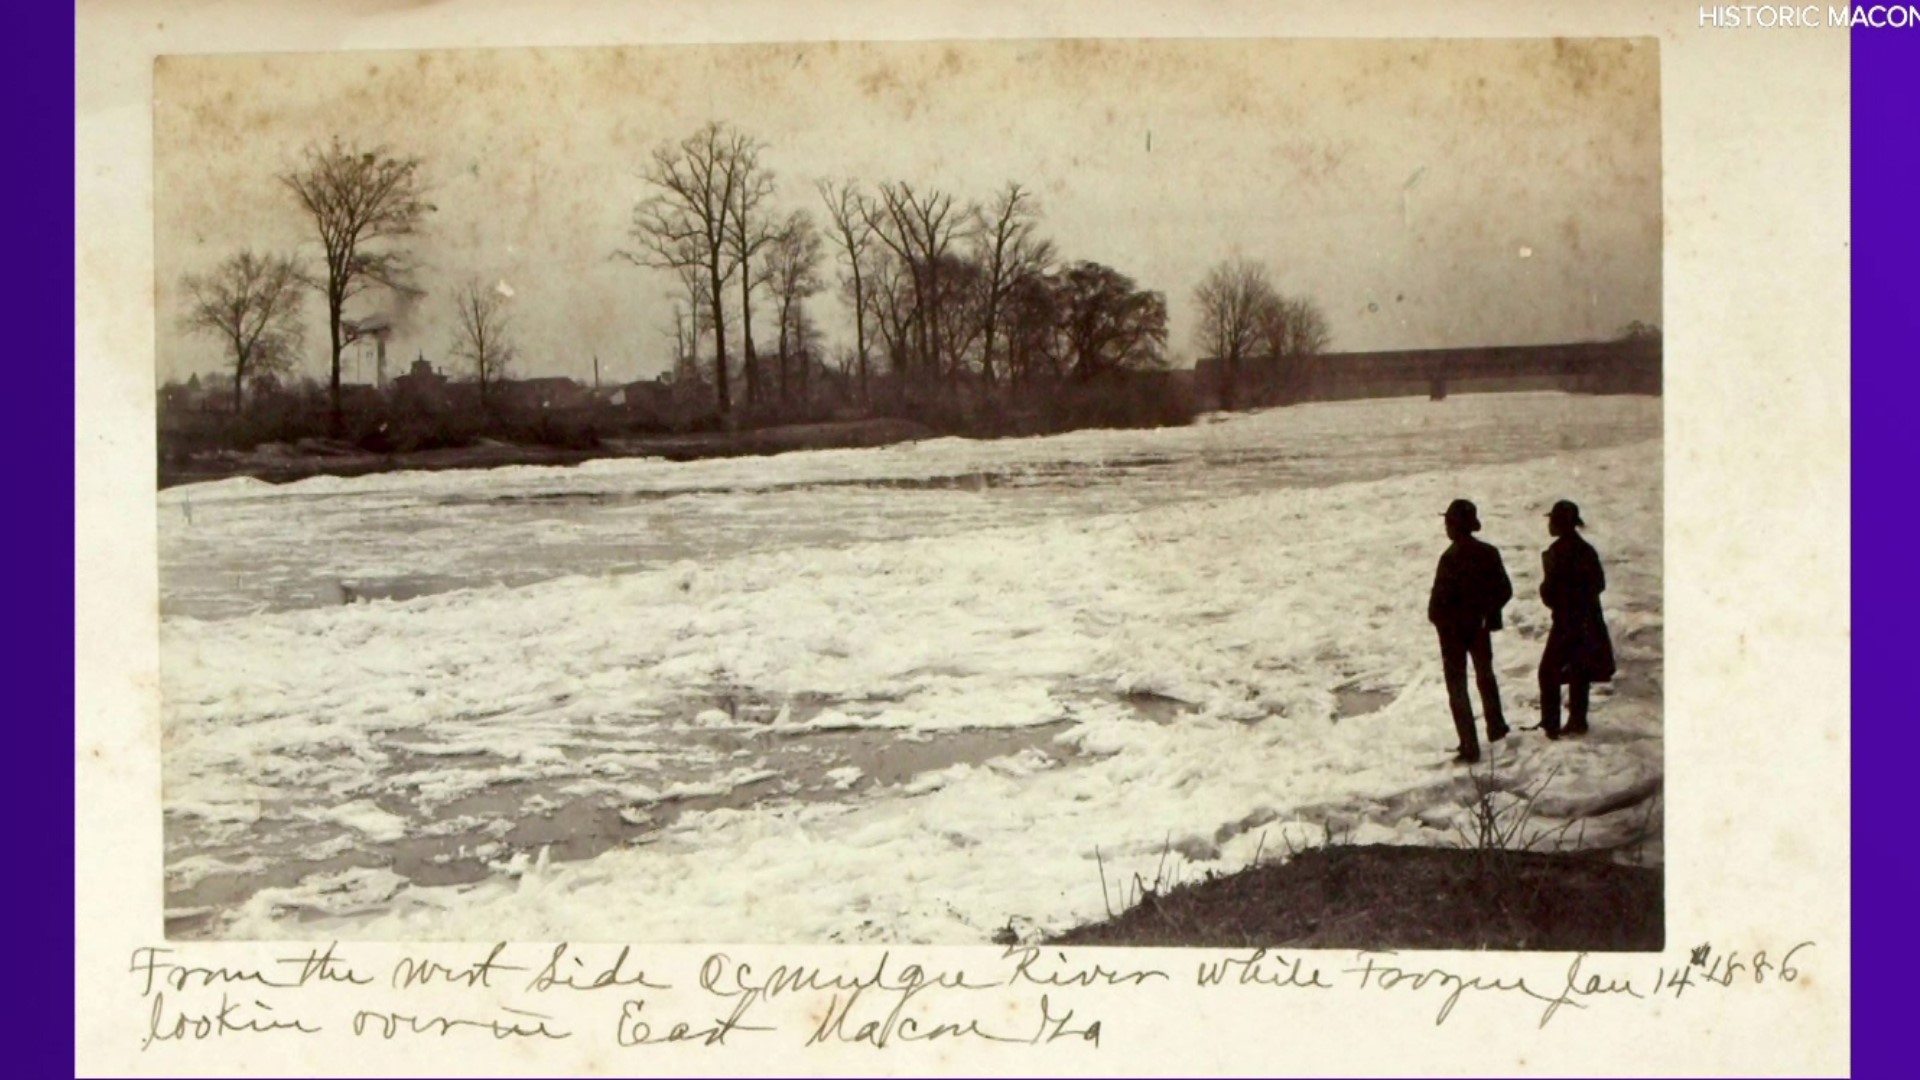 100 years after the founding of the United States, the Ocmulgee River froze in downtown Macon.